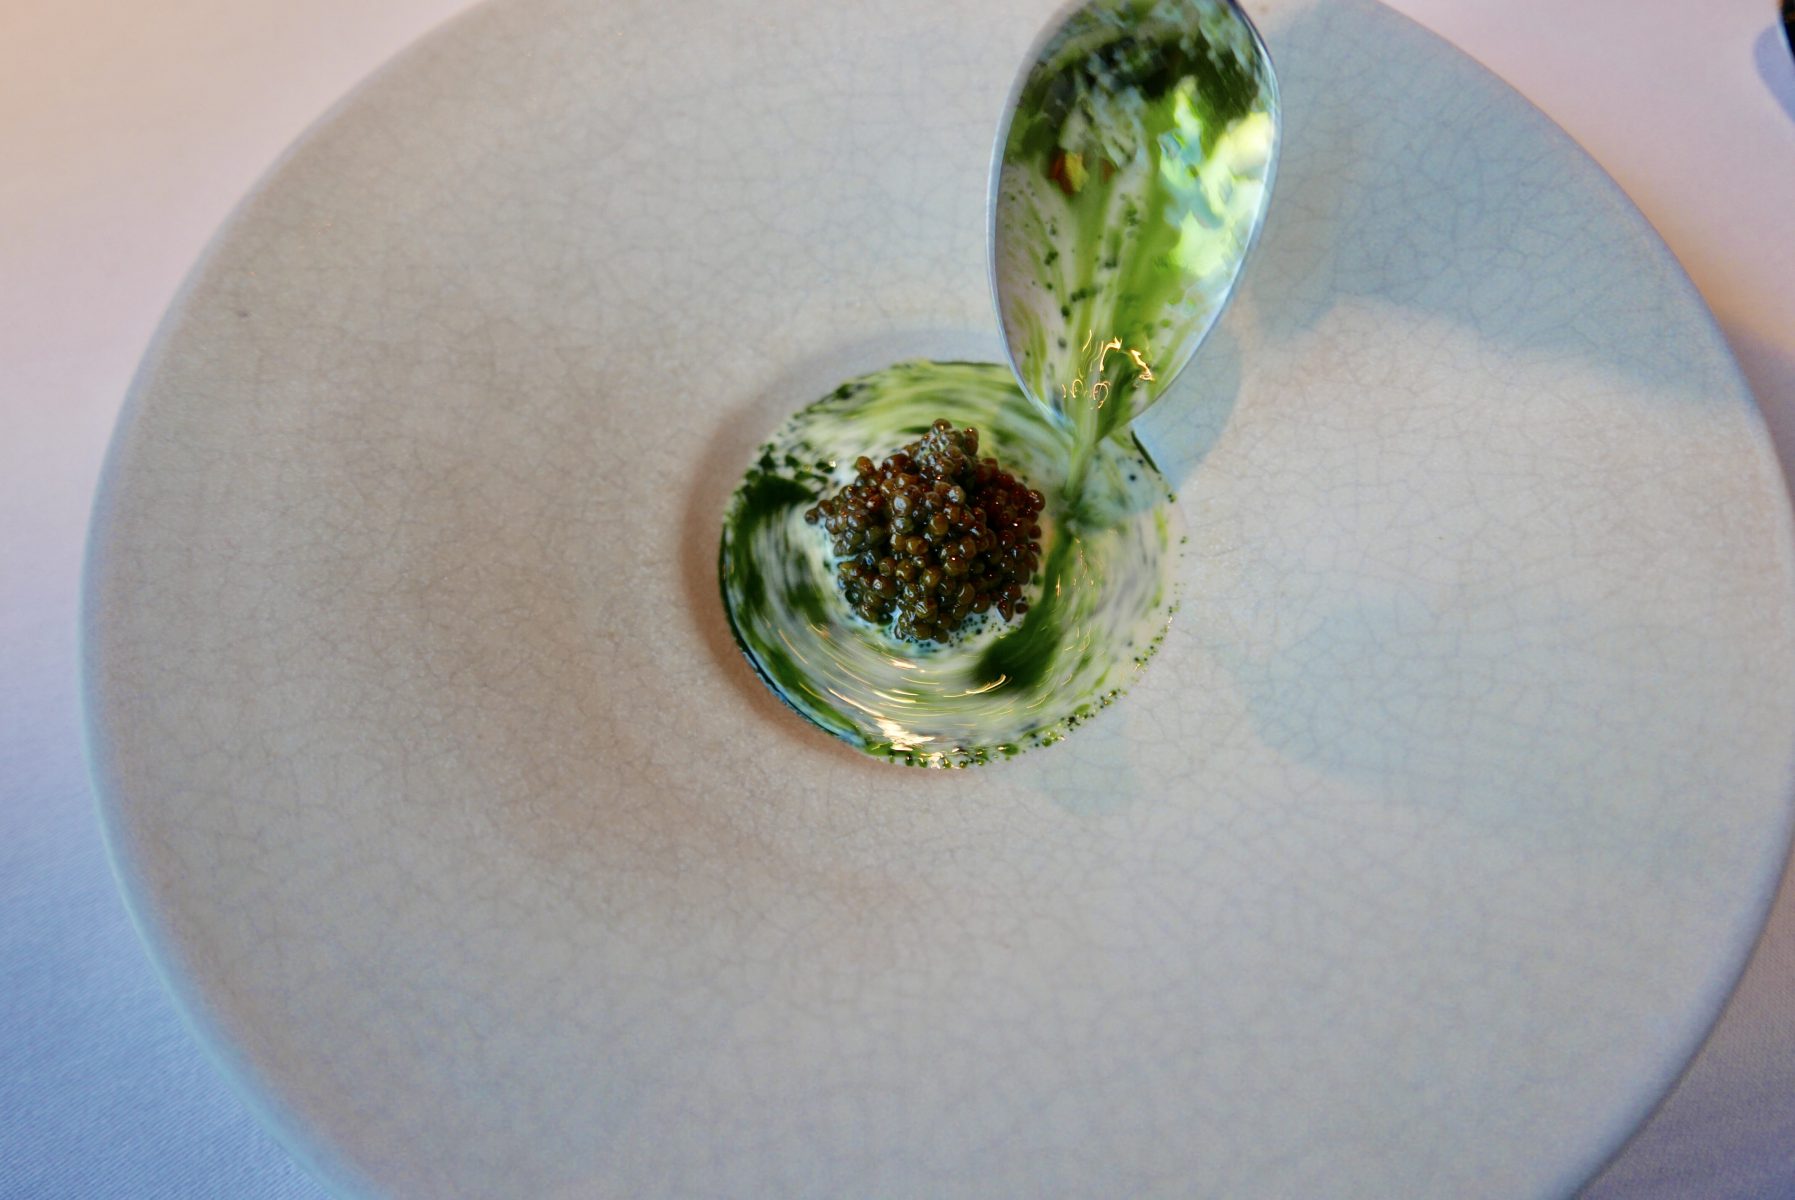 Aged caviar with salt from the west coast and emulsion of raw oysters, warm sauce of mussels and dill at Mäemo(3*), Oslo